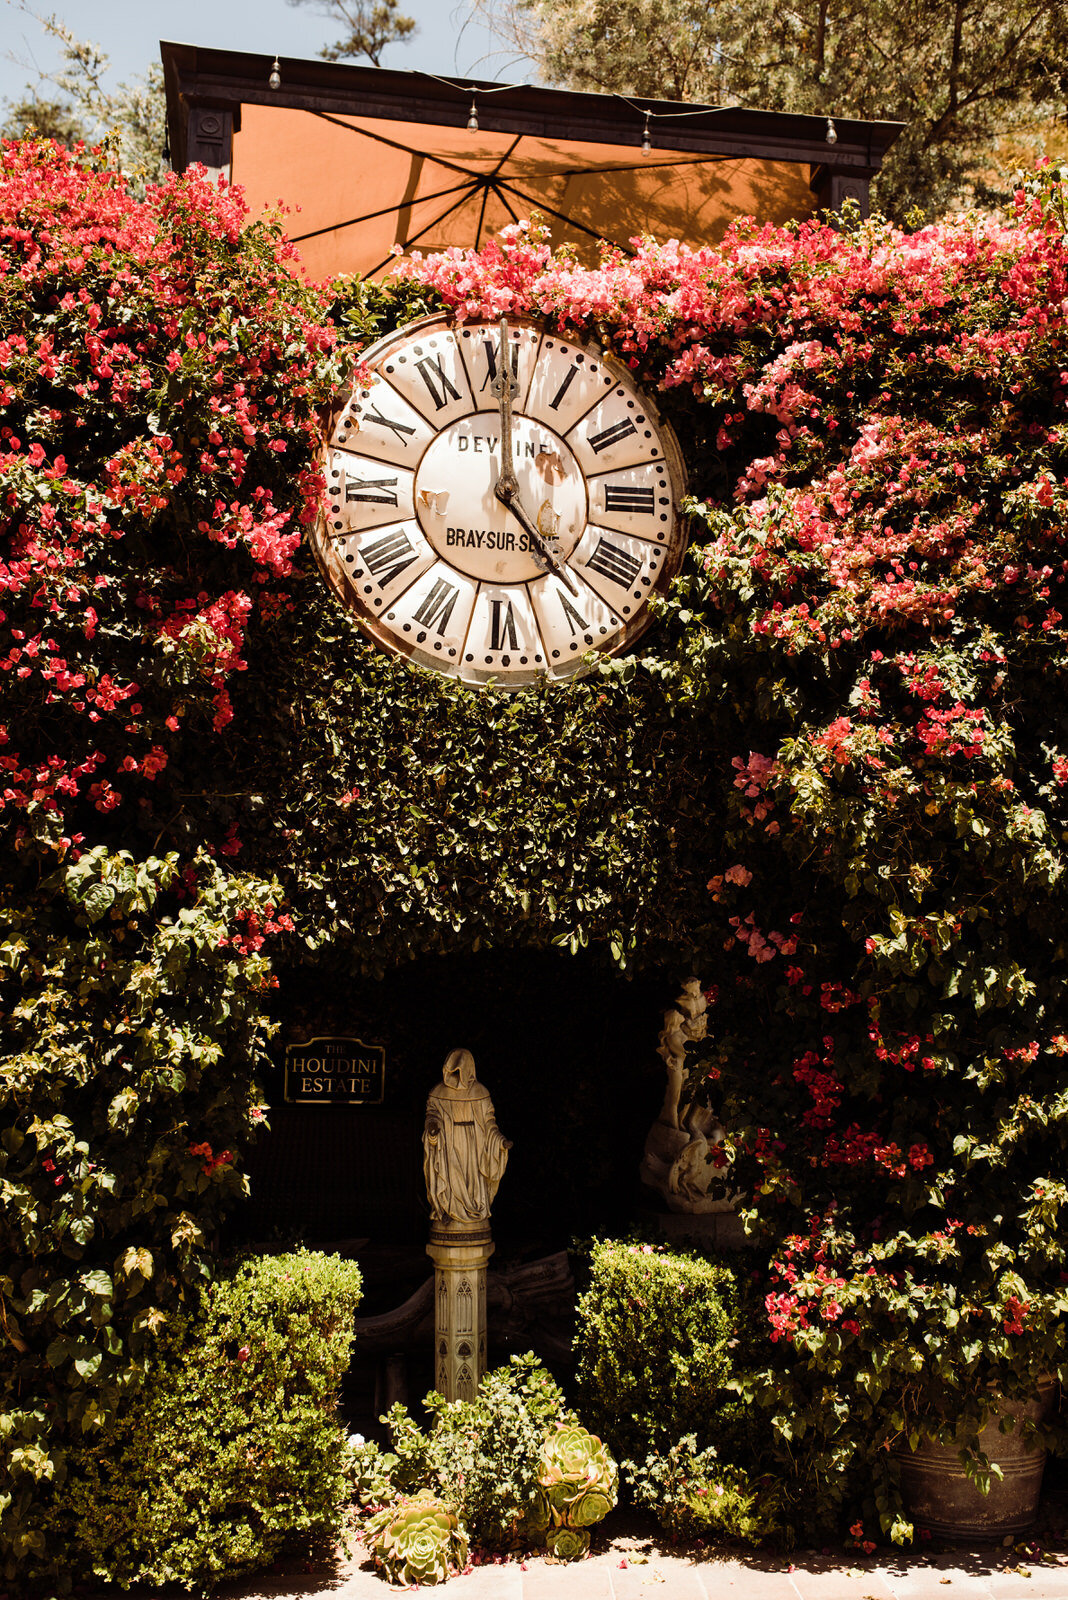 French Wall Clock at Houdini Estate in Laurel Canyon Surrounded by Flowering Pink Bougainvillea | LA Wedding Venue | Laurel Canyon Los Angeles Wedding | Photo by Kept Record | www.keptrecord.com